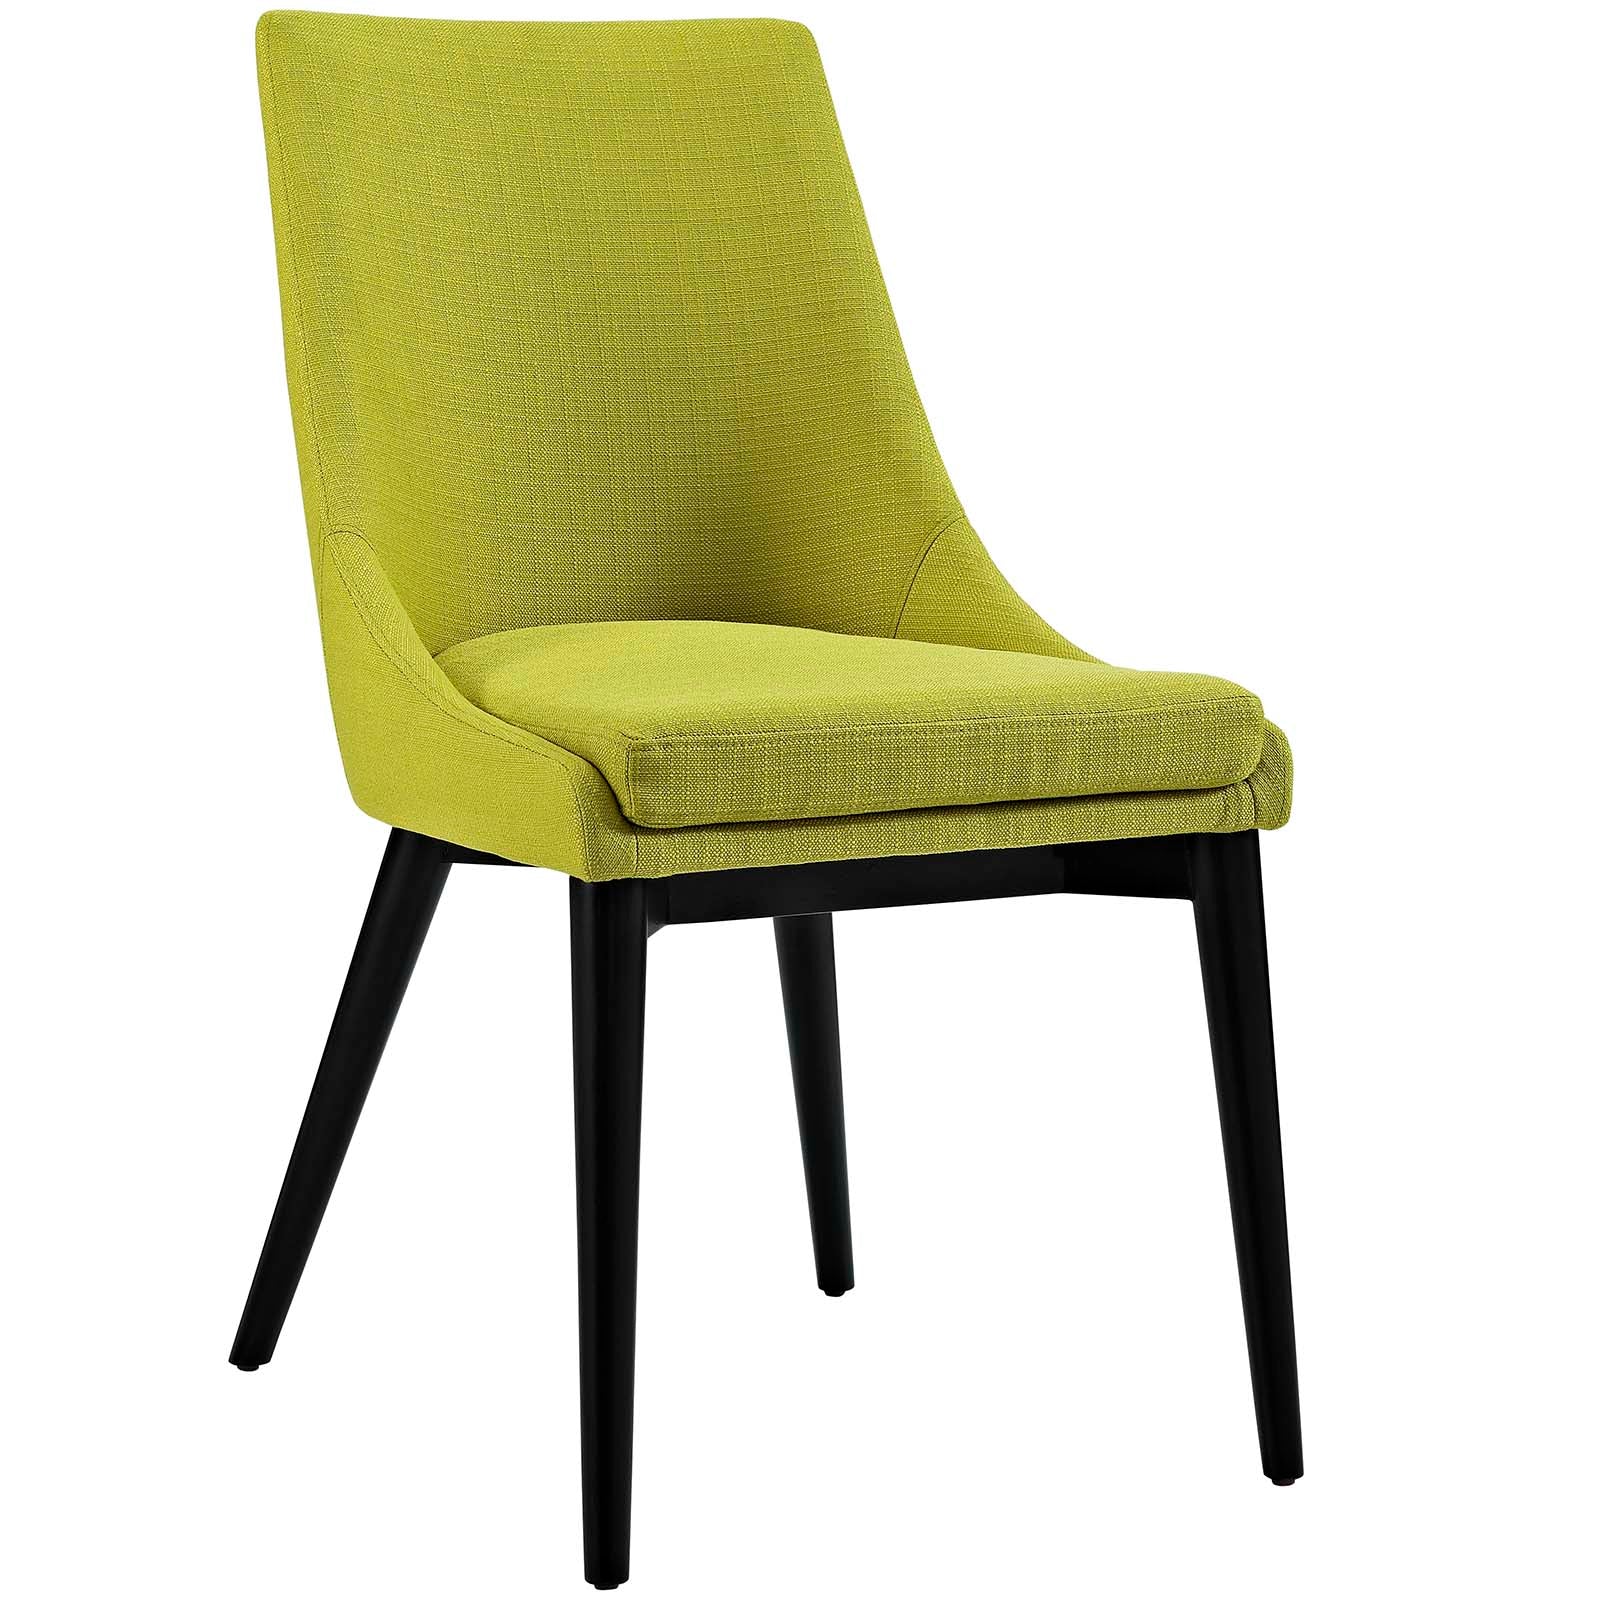 viscount Dining Side Chair Fabric Set of 2 Wheatgrass